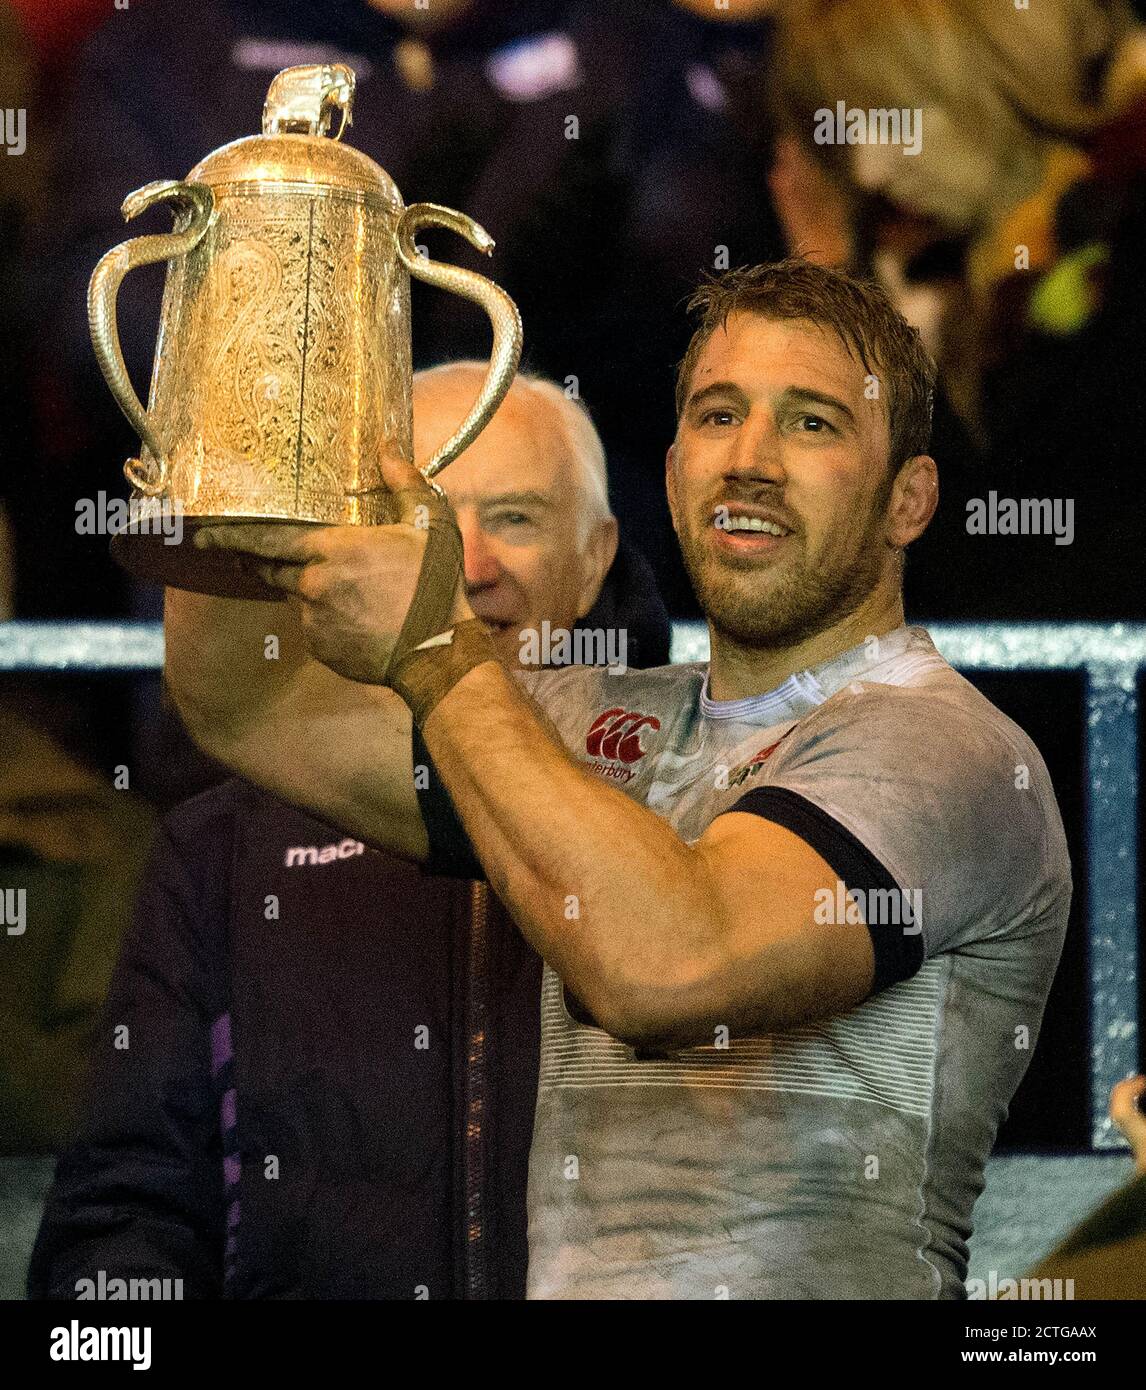 CHRIS ROBSHAW LIFTS THE CALCUTTA CUP AFTER A CONVINCING 20-0 VICTORY. SCOTLAND v ENGLAND, SIX NATIONS CHAMPIONSHIP, MURRAYFIELD. Picture :© MARK PAIN Stock Photo